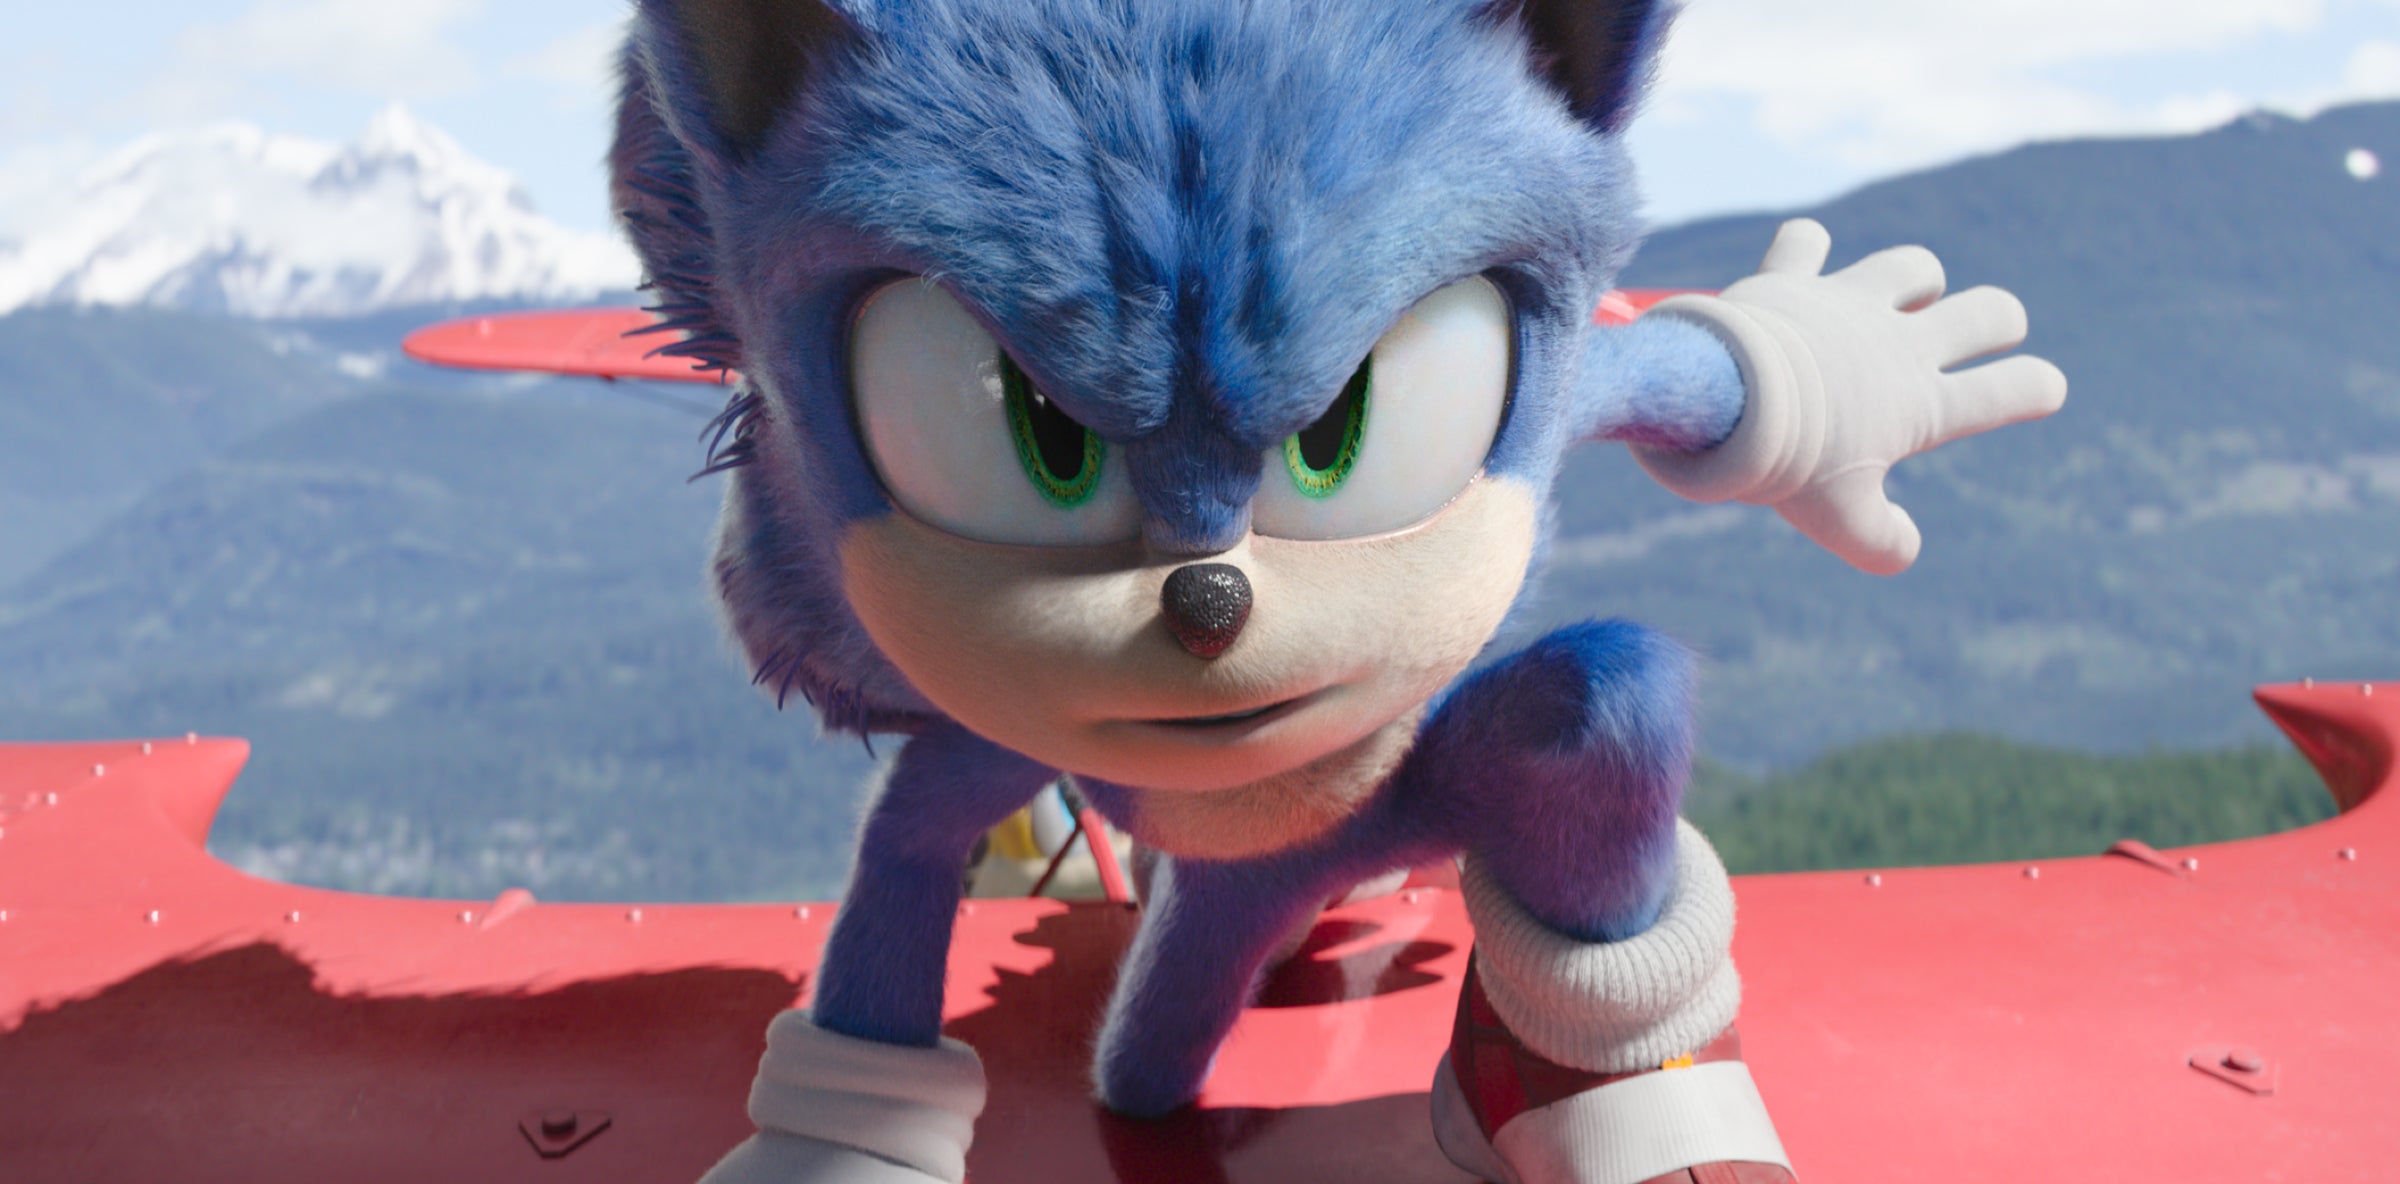 Image for Sonic The Hedgehog 2 gets first trailer, introduces Tails and Knuckles